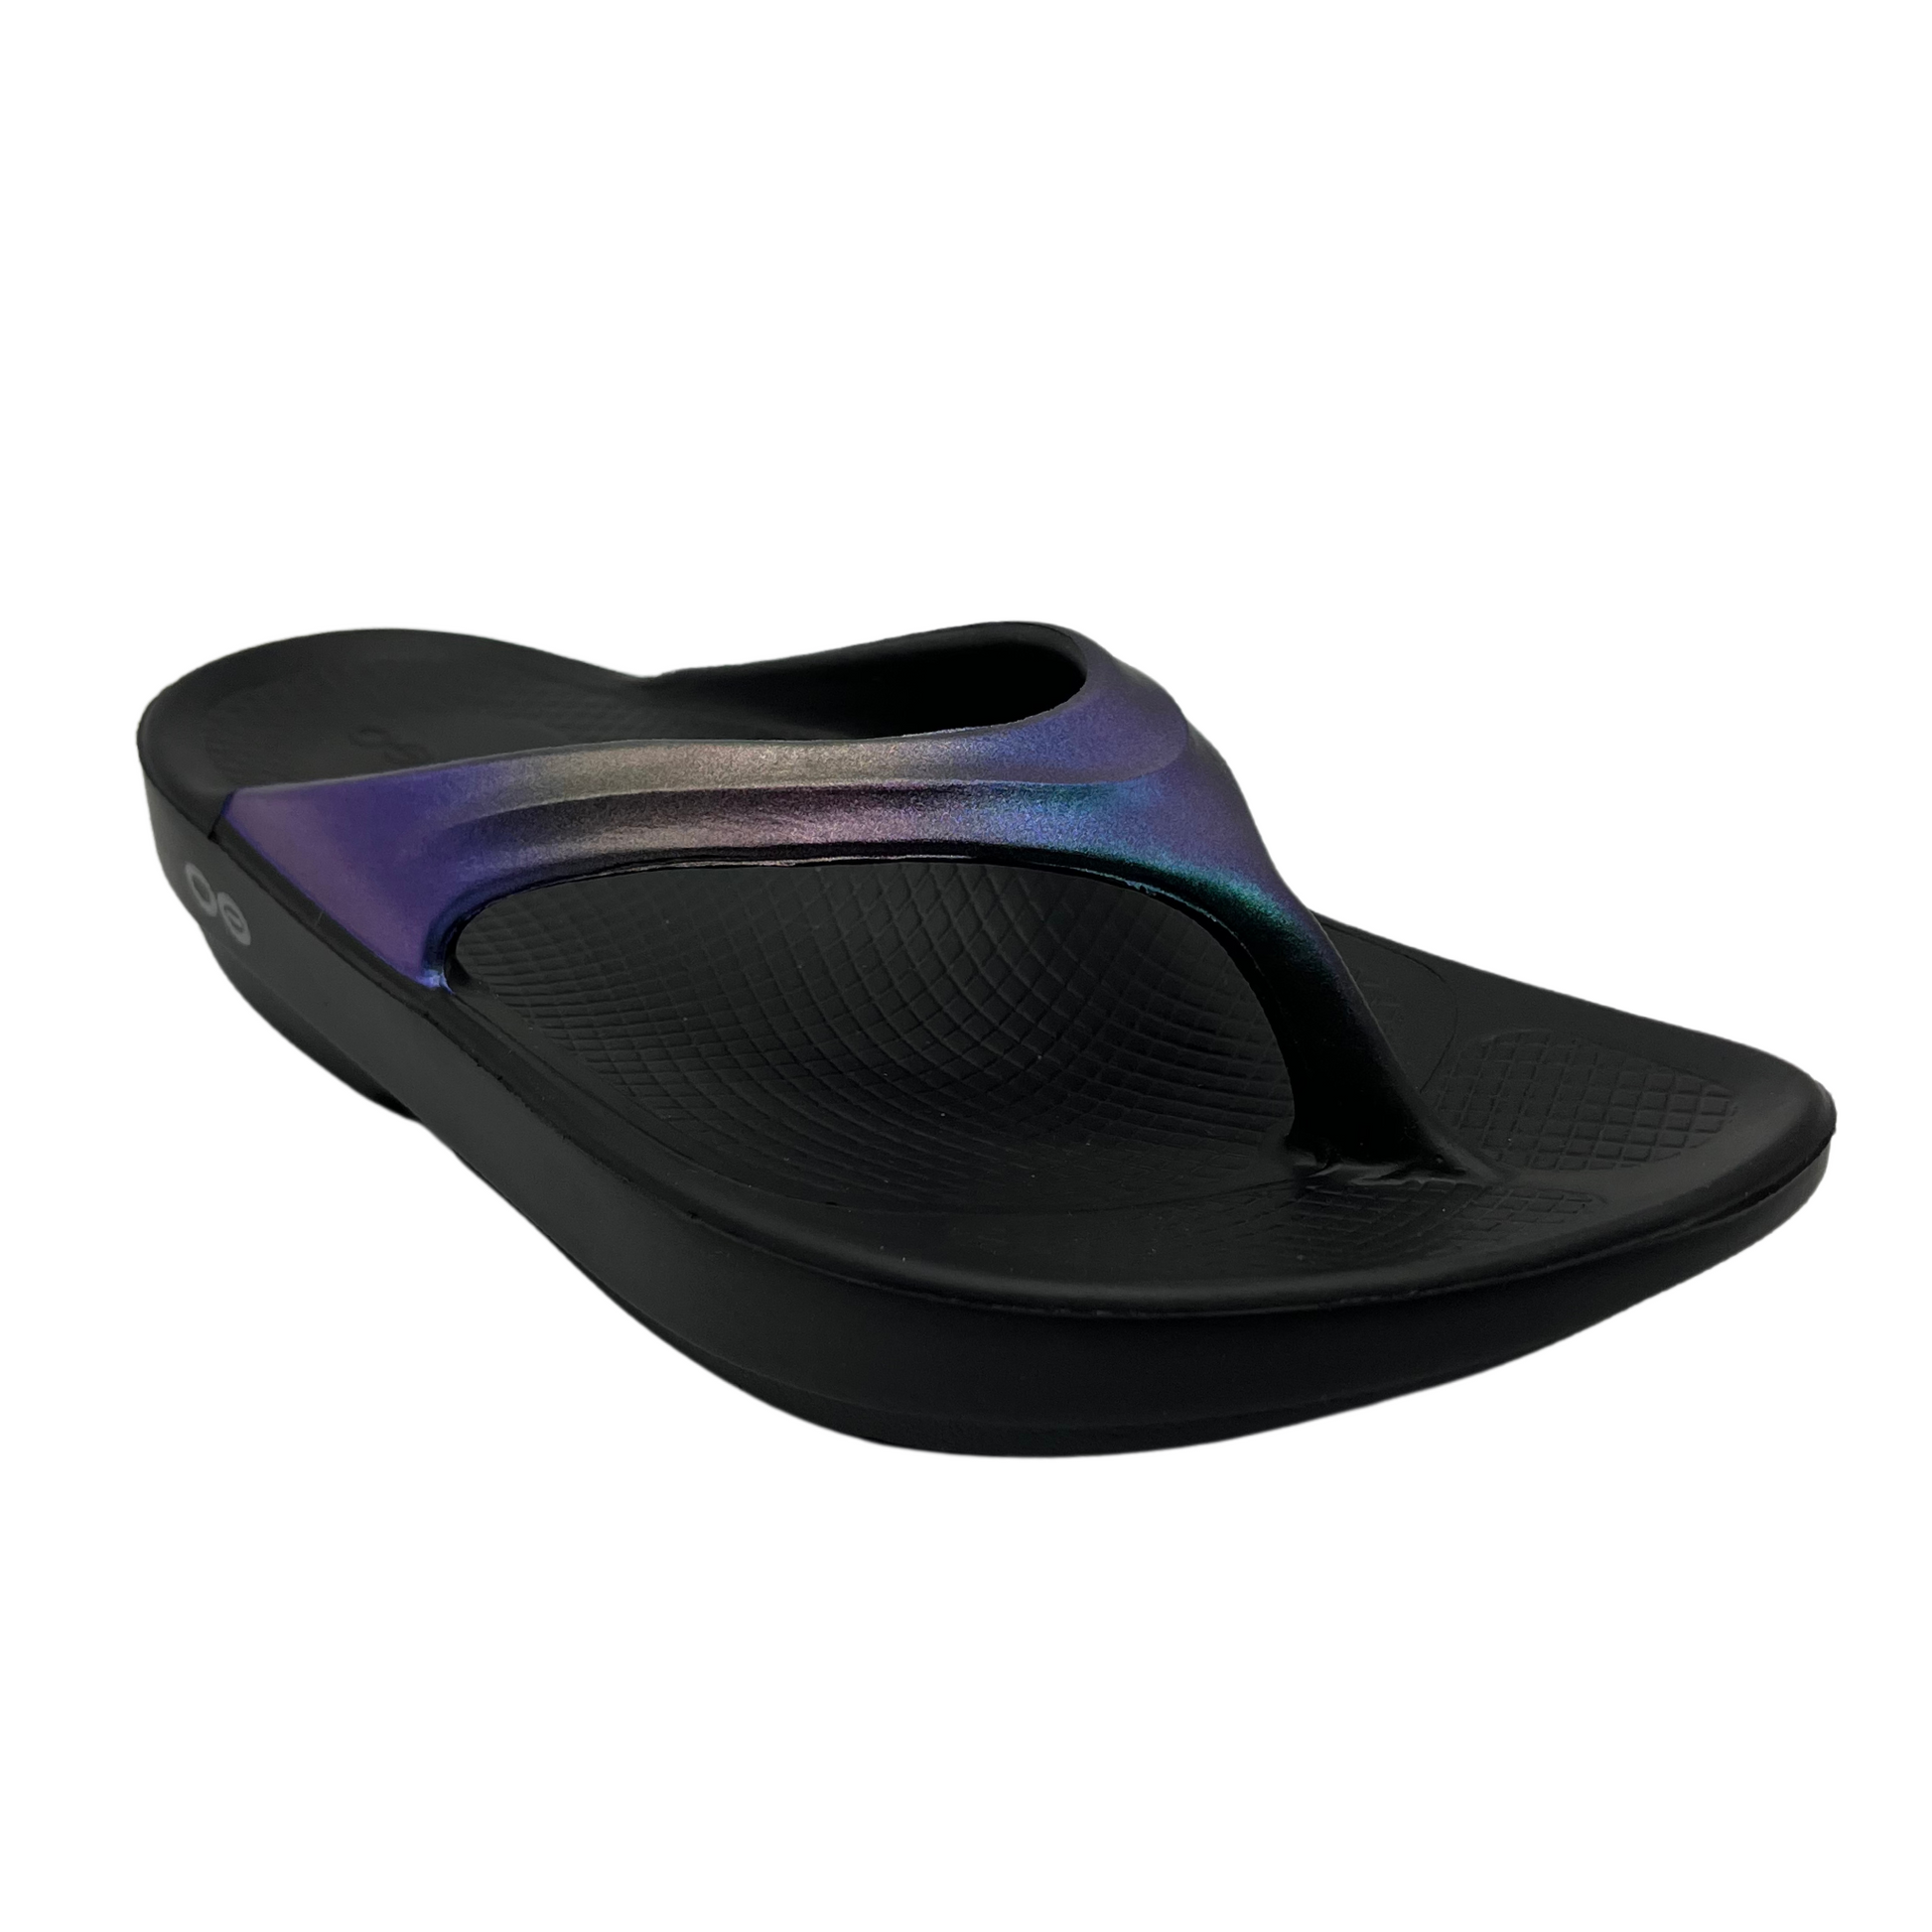 45 degree angled view of black thong sandal with iridescent purple upper